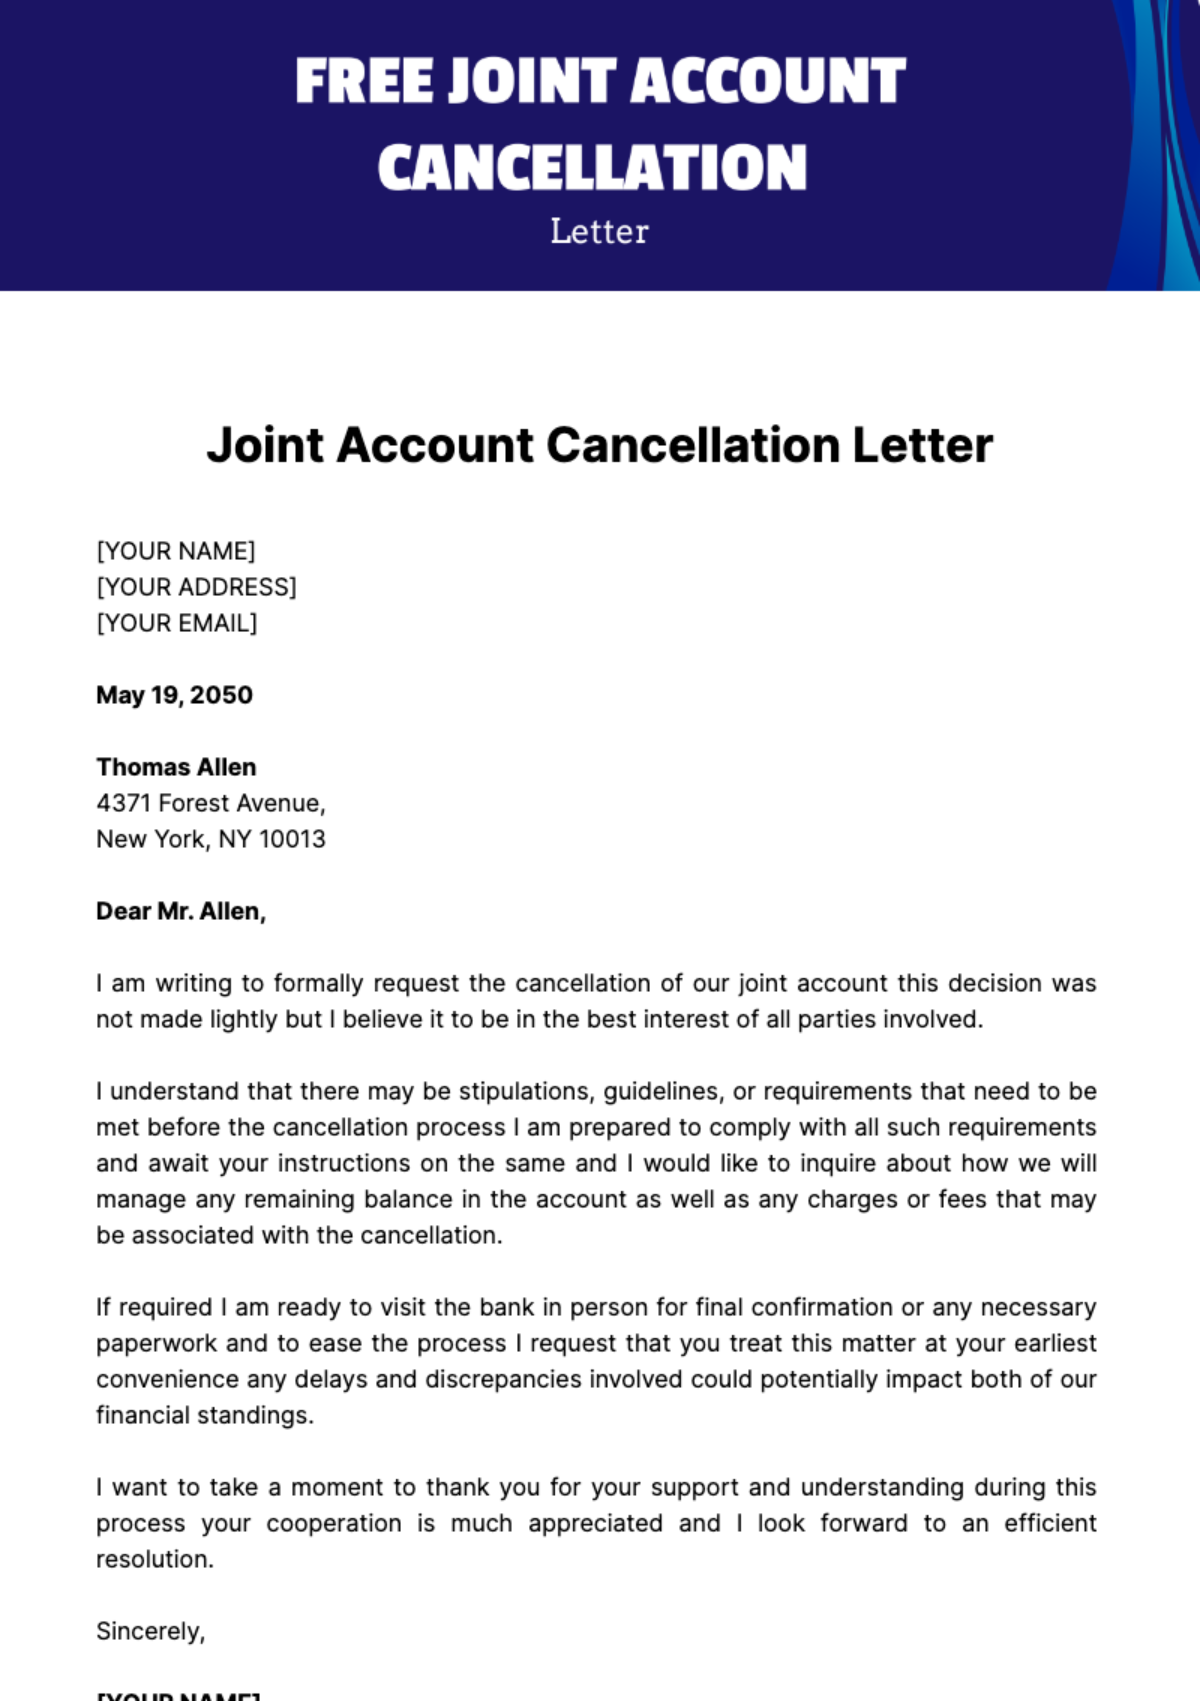 Free Joint Account Cancellation Letter Template